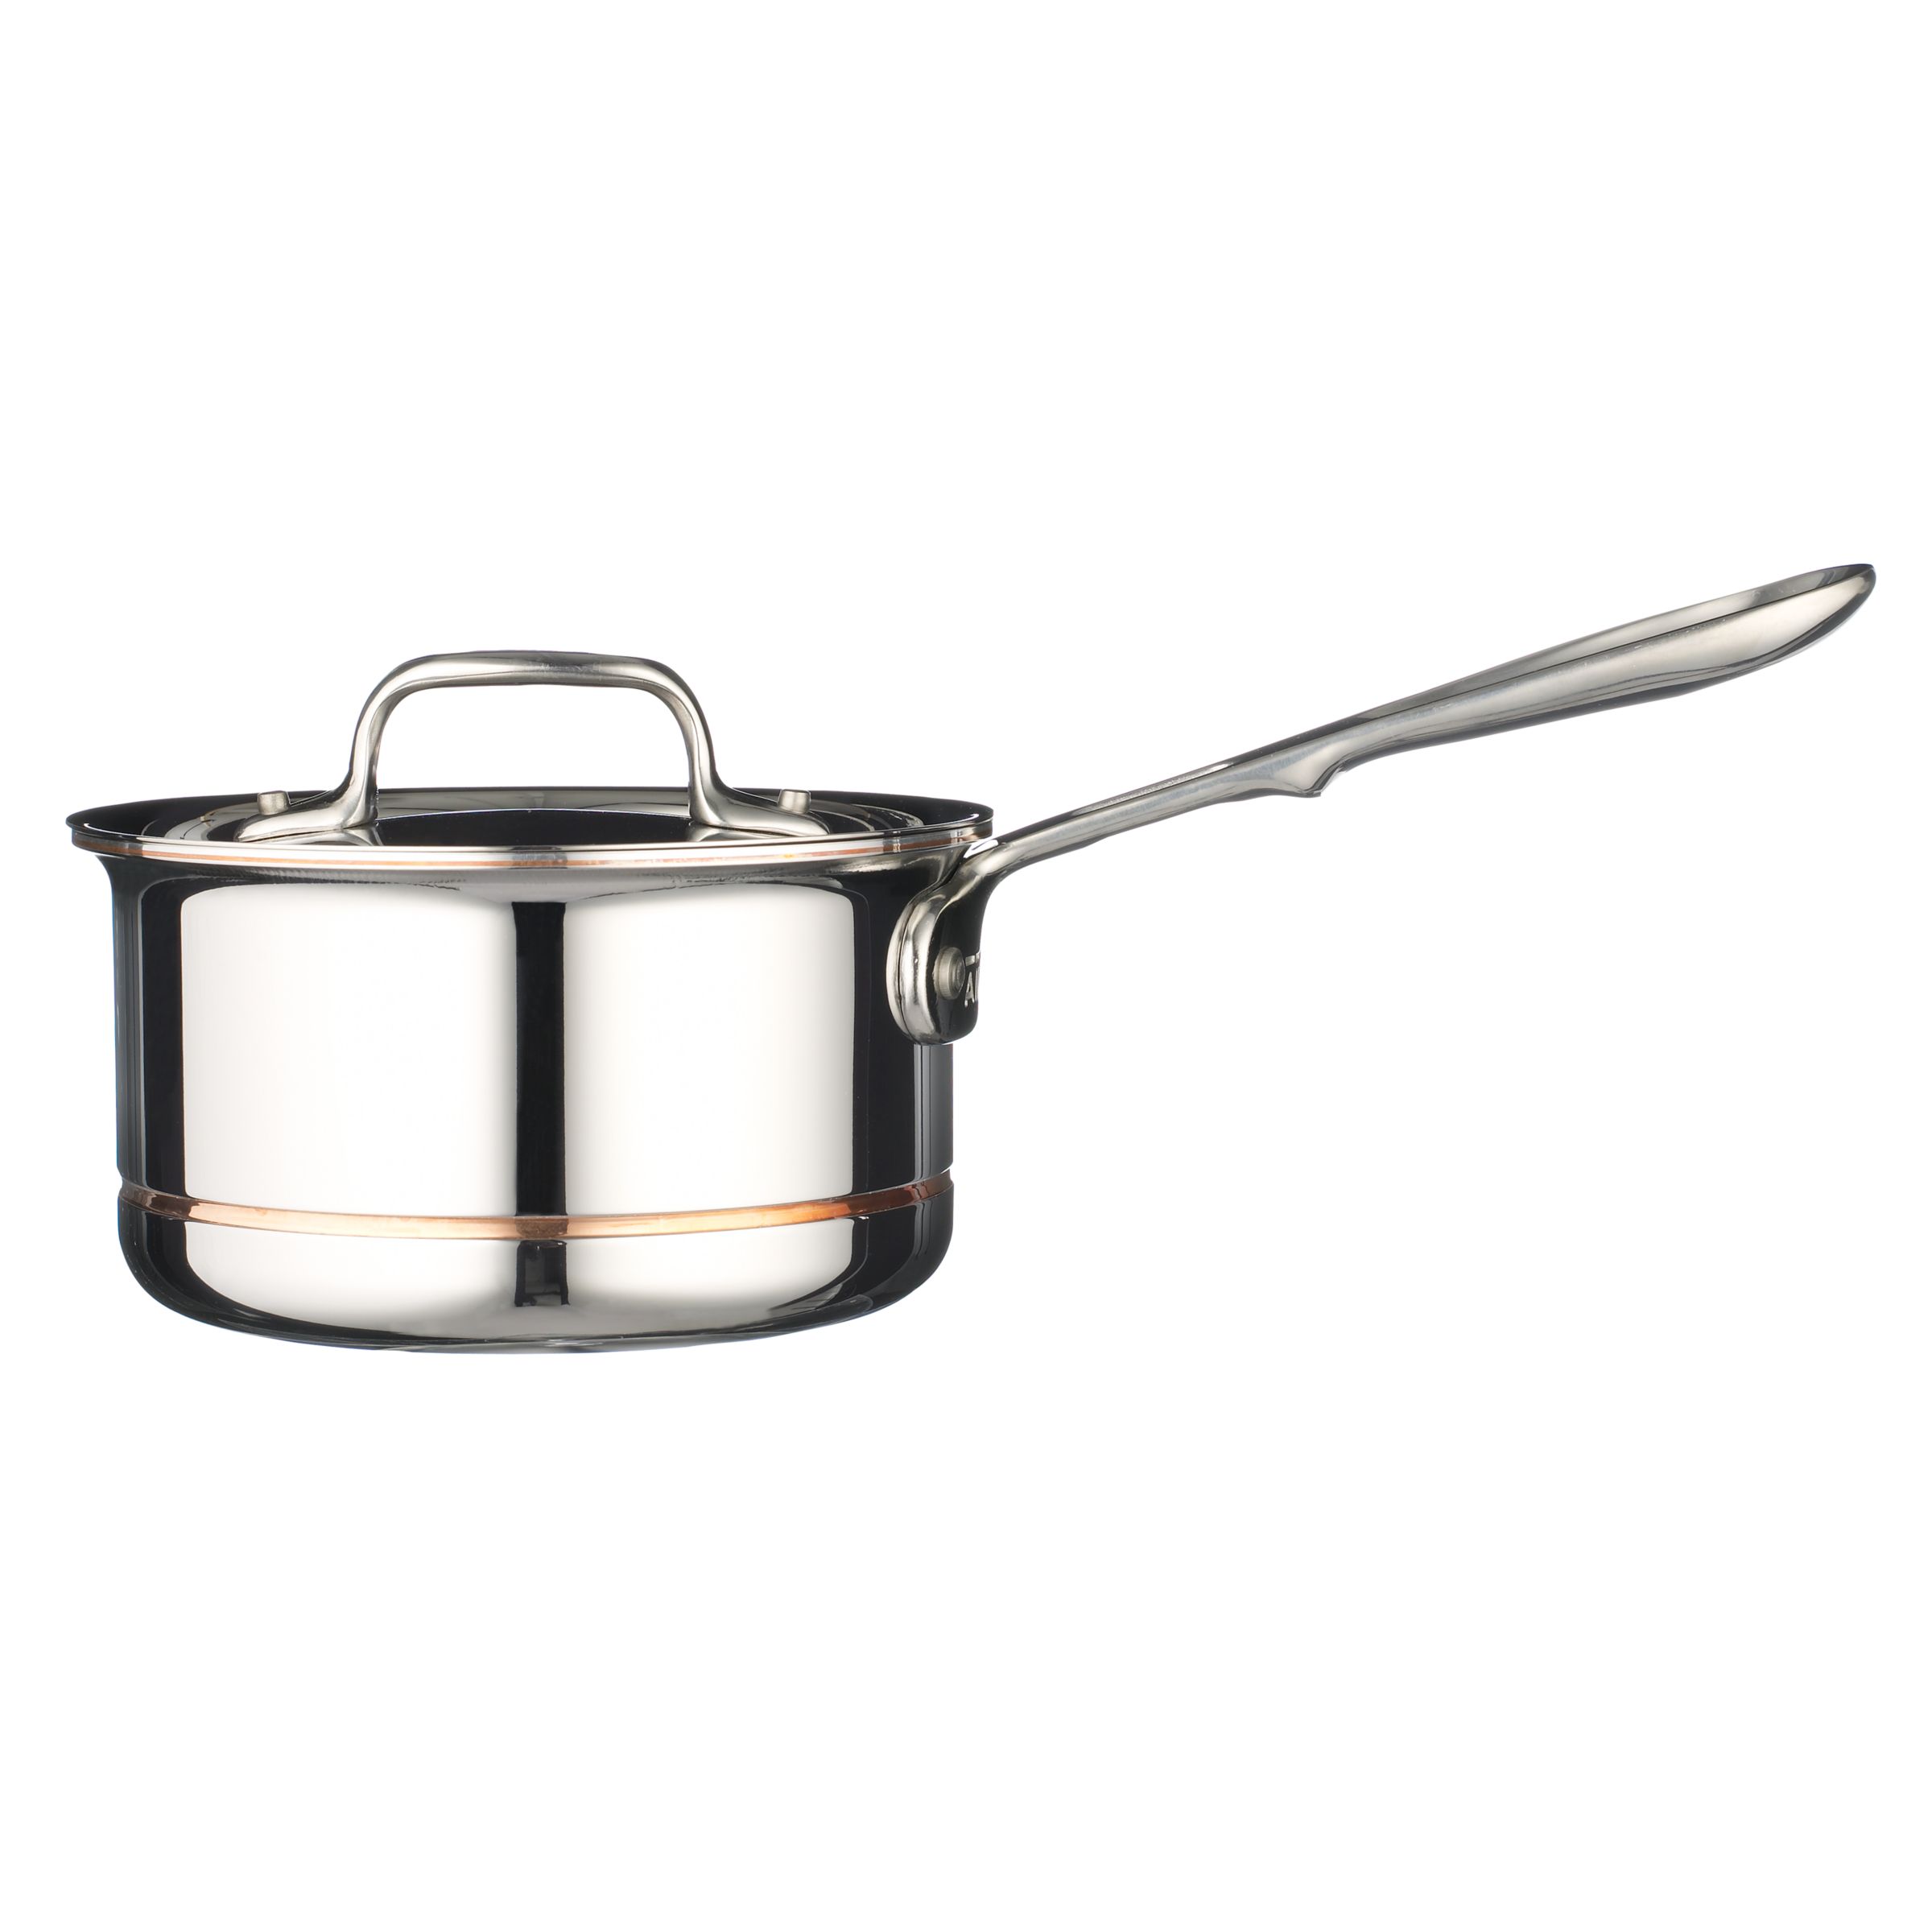 All-Clad Copper-Core Collection, Lidded Saucepan, 6" at John Lewis